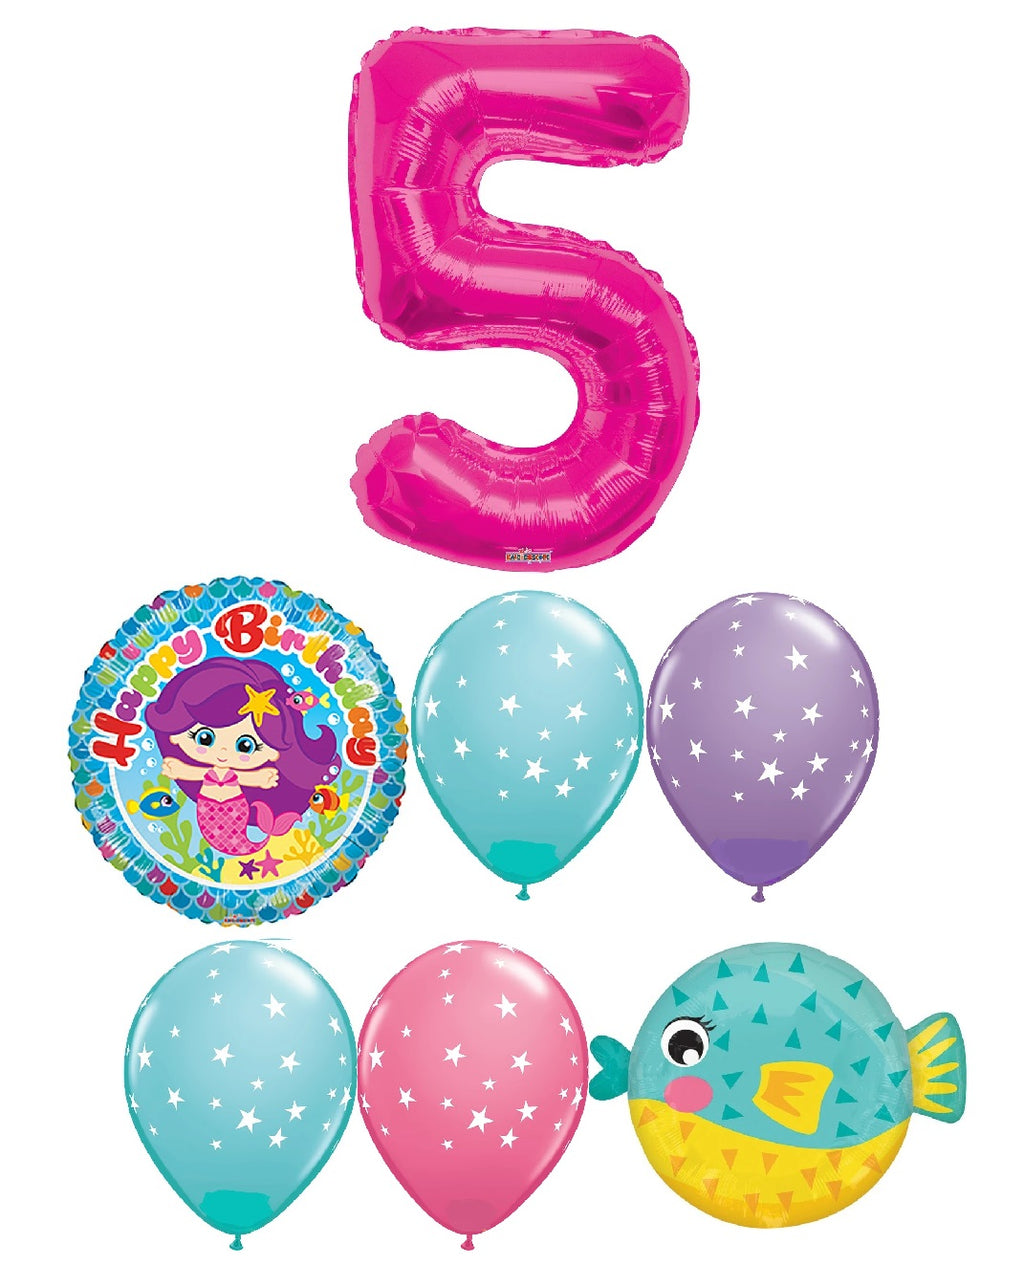 Mermaid Pick An Age Number Fish Balloon Bouquet with Helium Weight